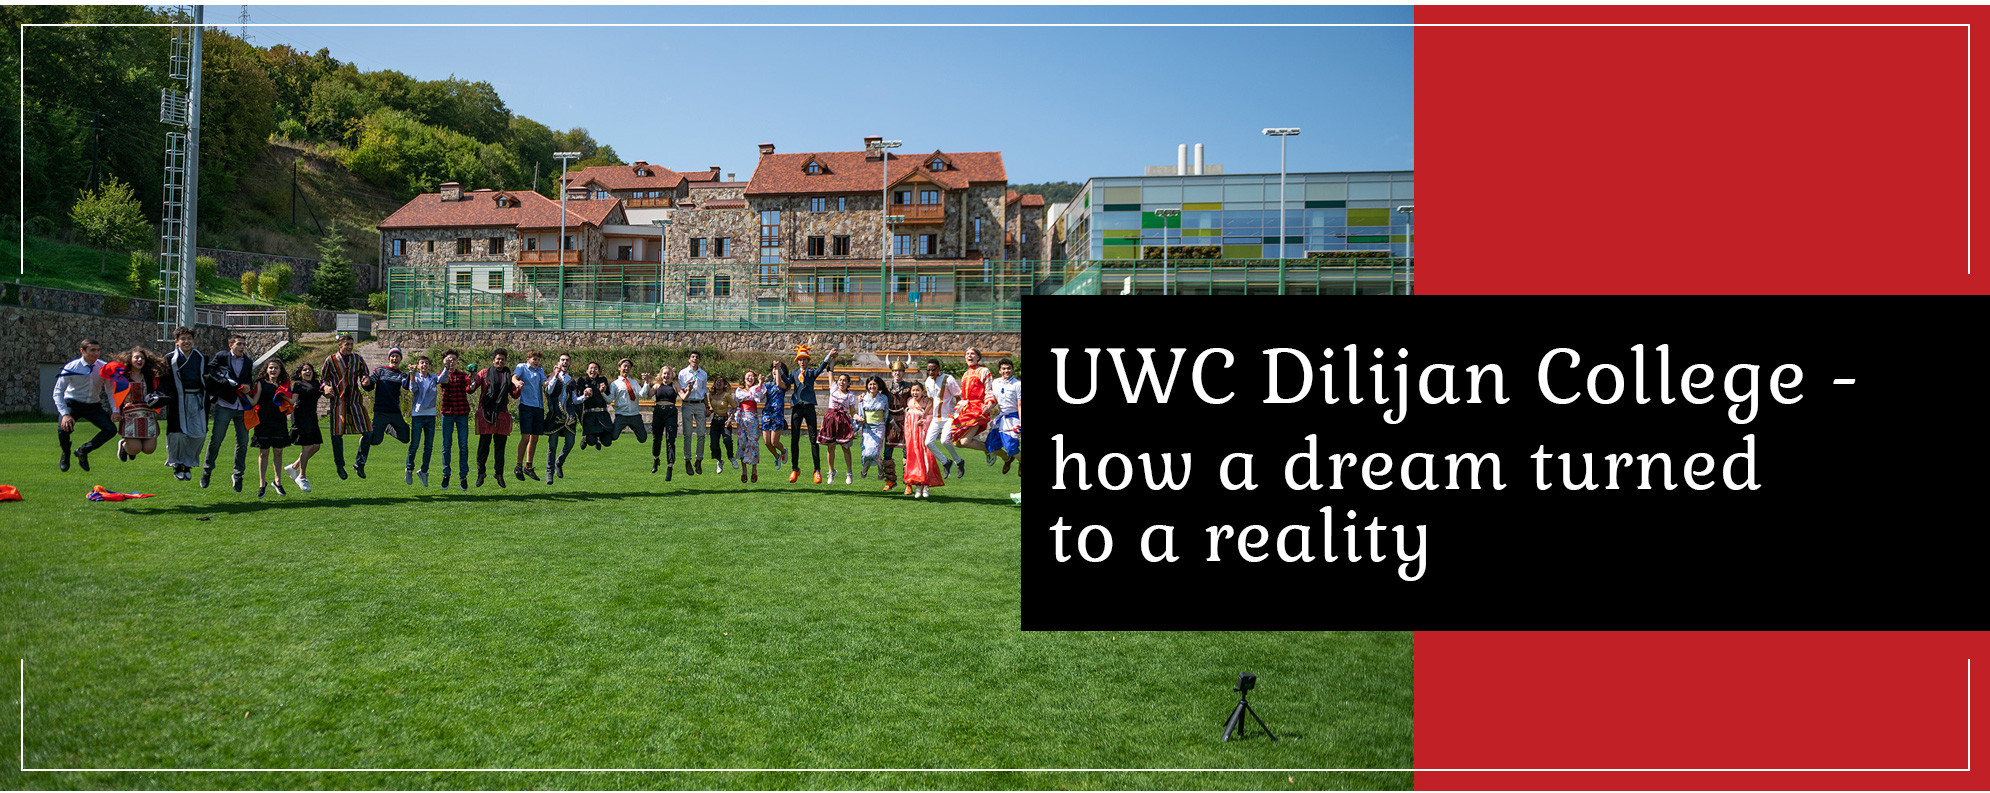 UWC Dilijan College - how a dream turned to a reality